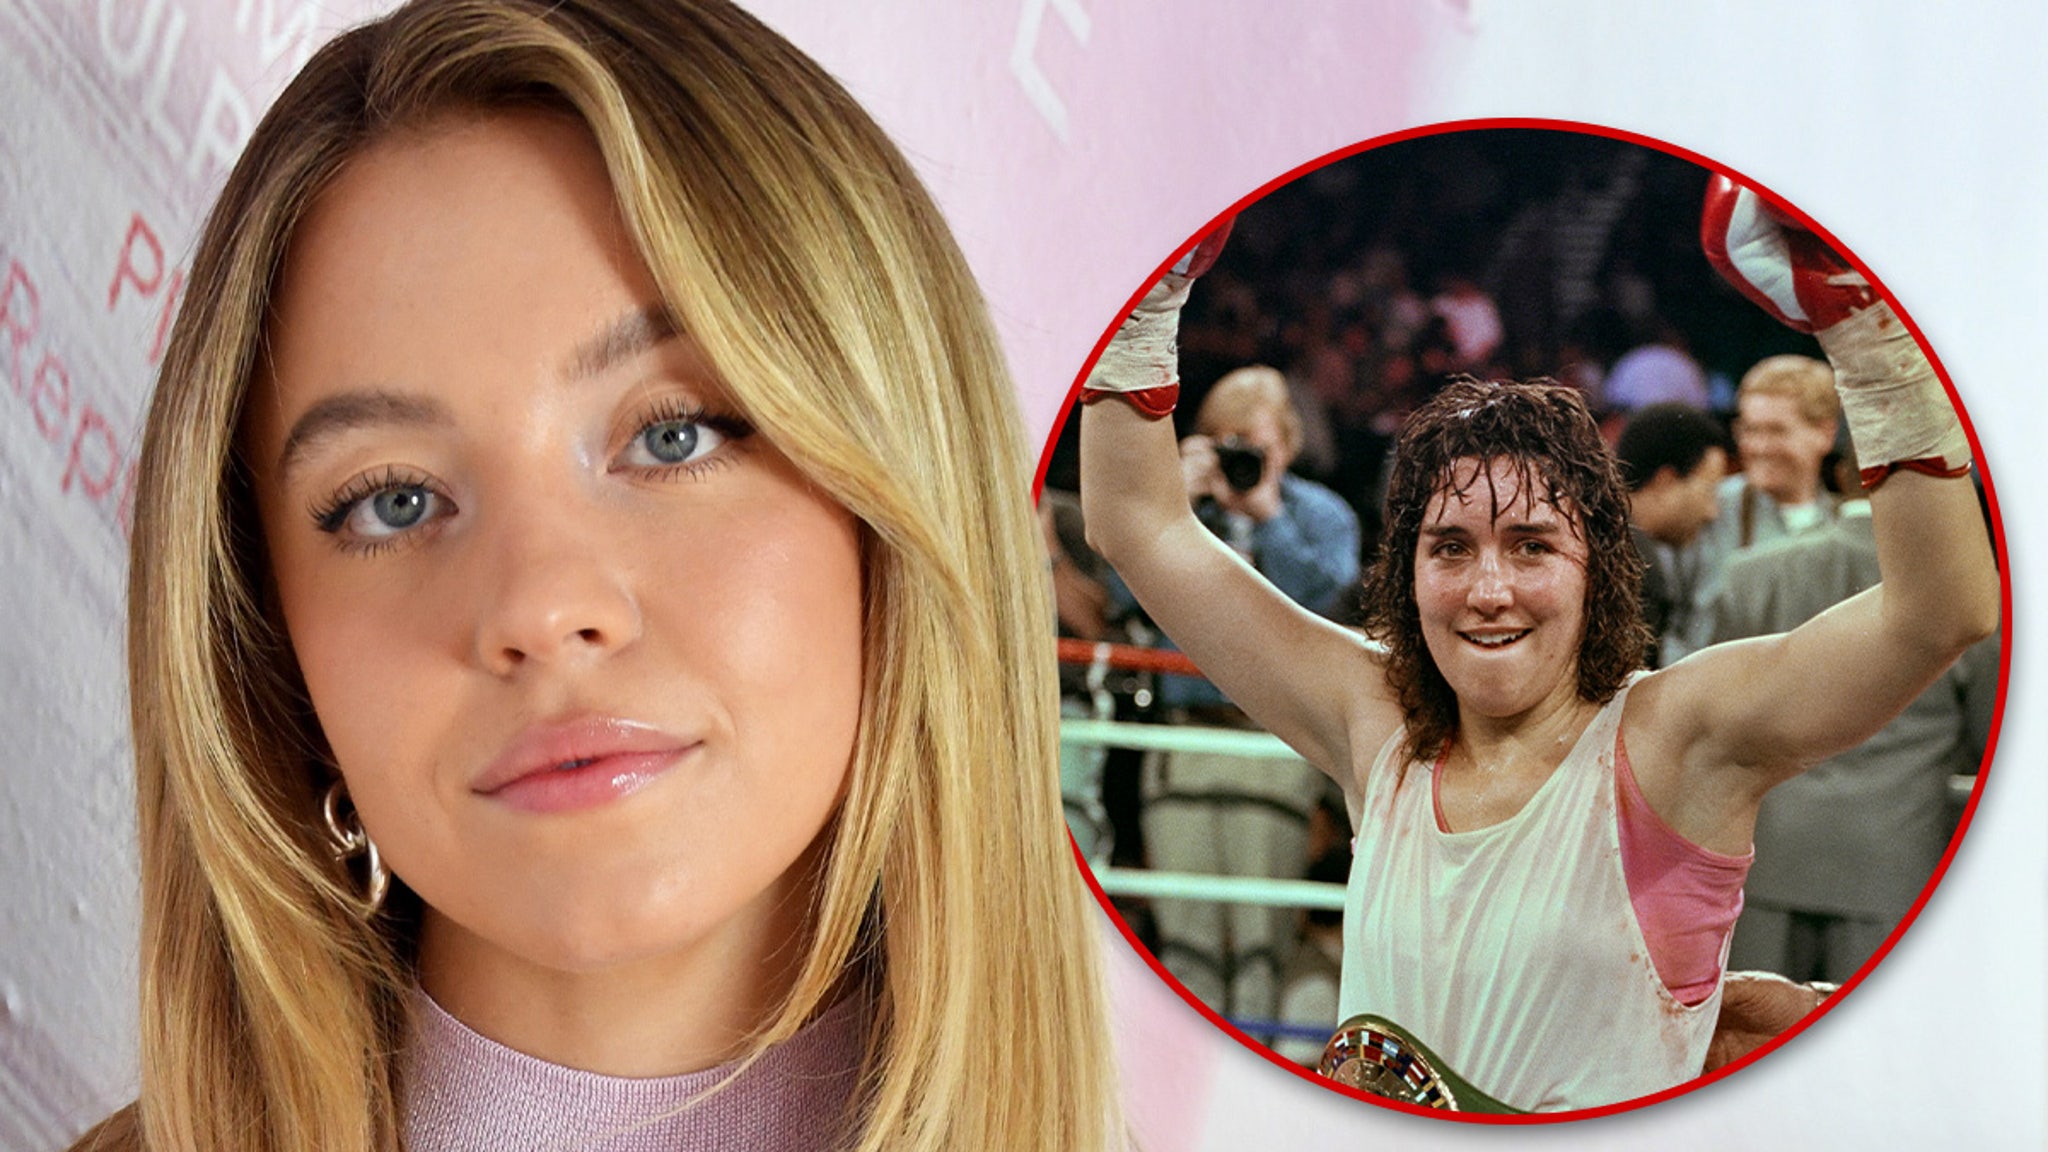 Sydney Sweeney Can't Wait to Transform Her Body to Play Female Boxer